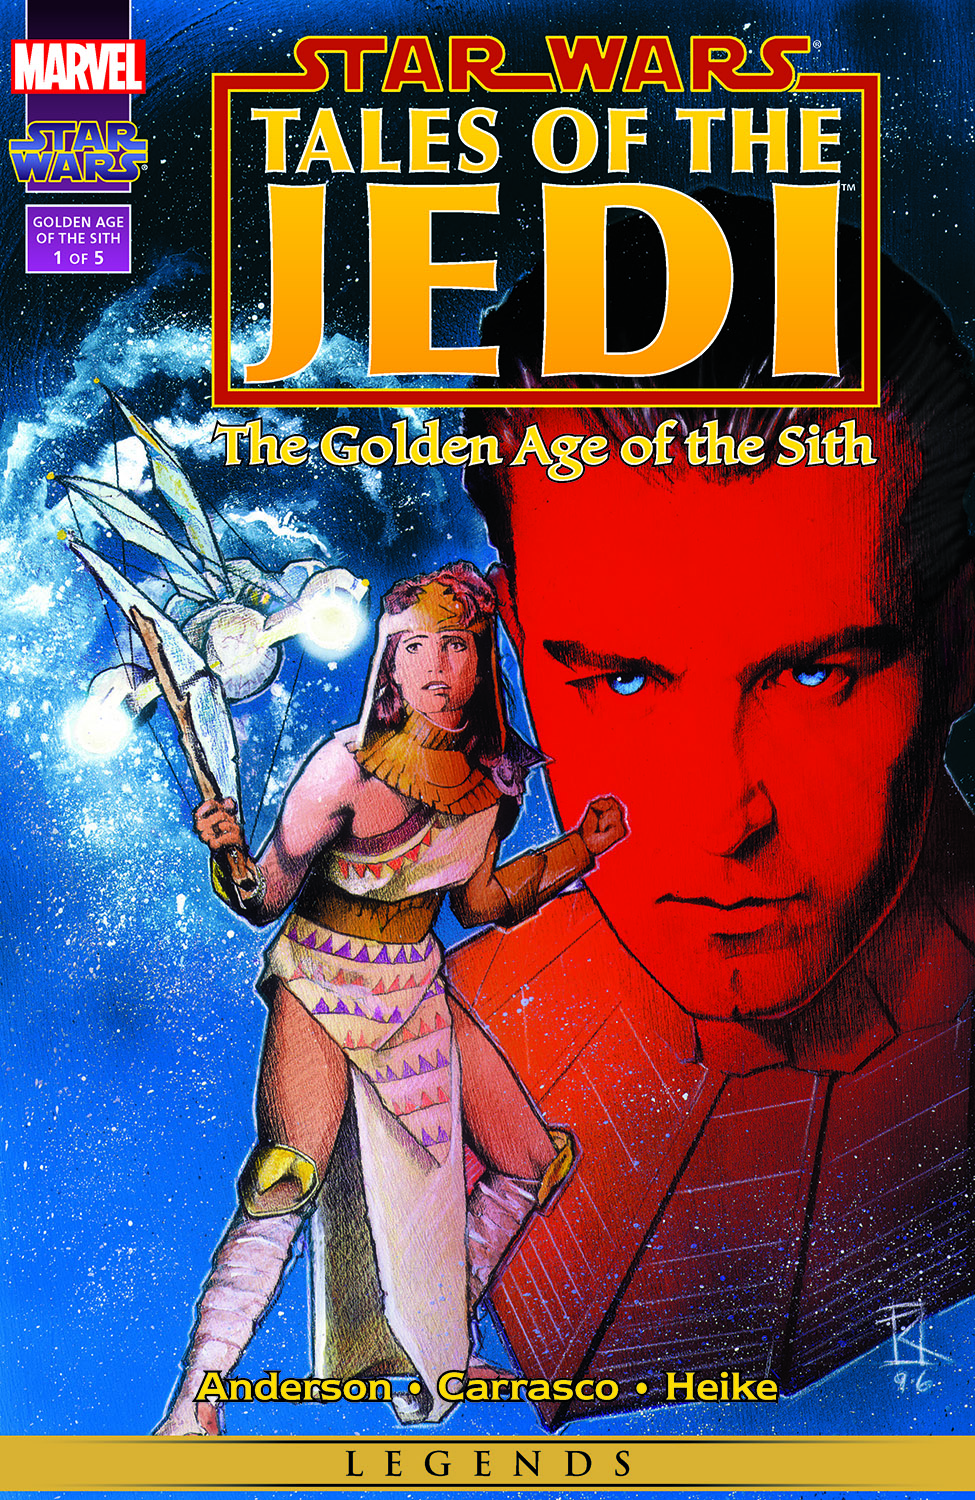 Star Wars: Tales of the Jedi - The Golden Age of the Sith (1996) #1